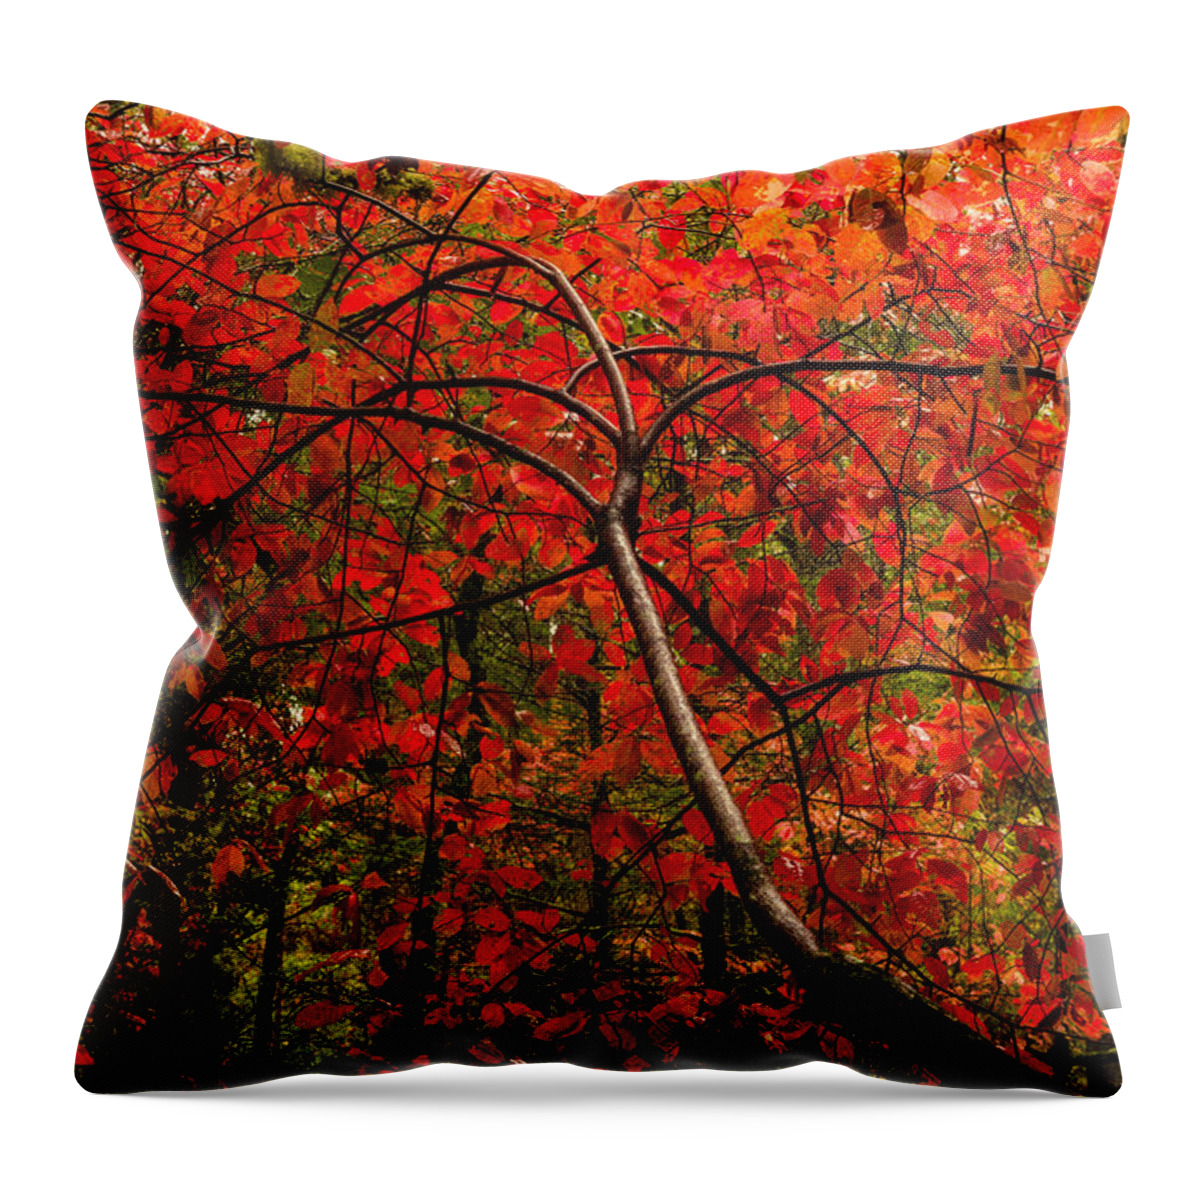 Red Throw Pillow featuring the photograph Red by Chad Dutson